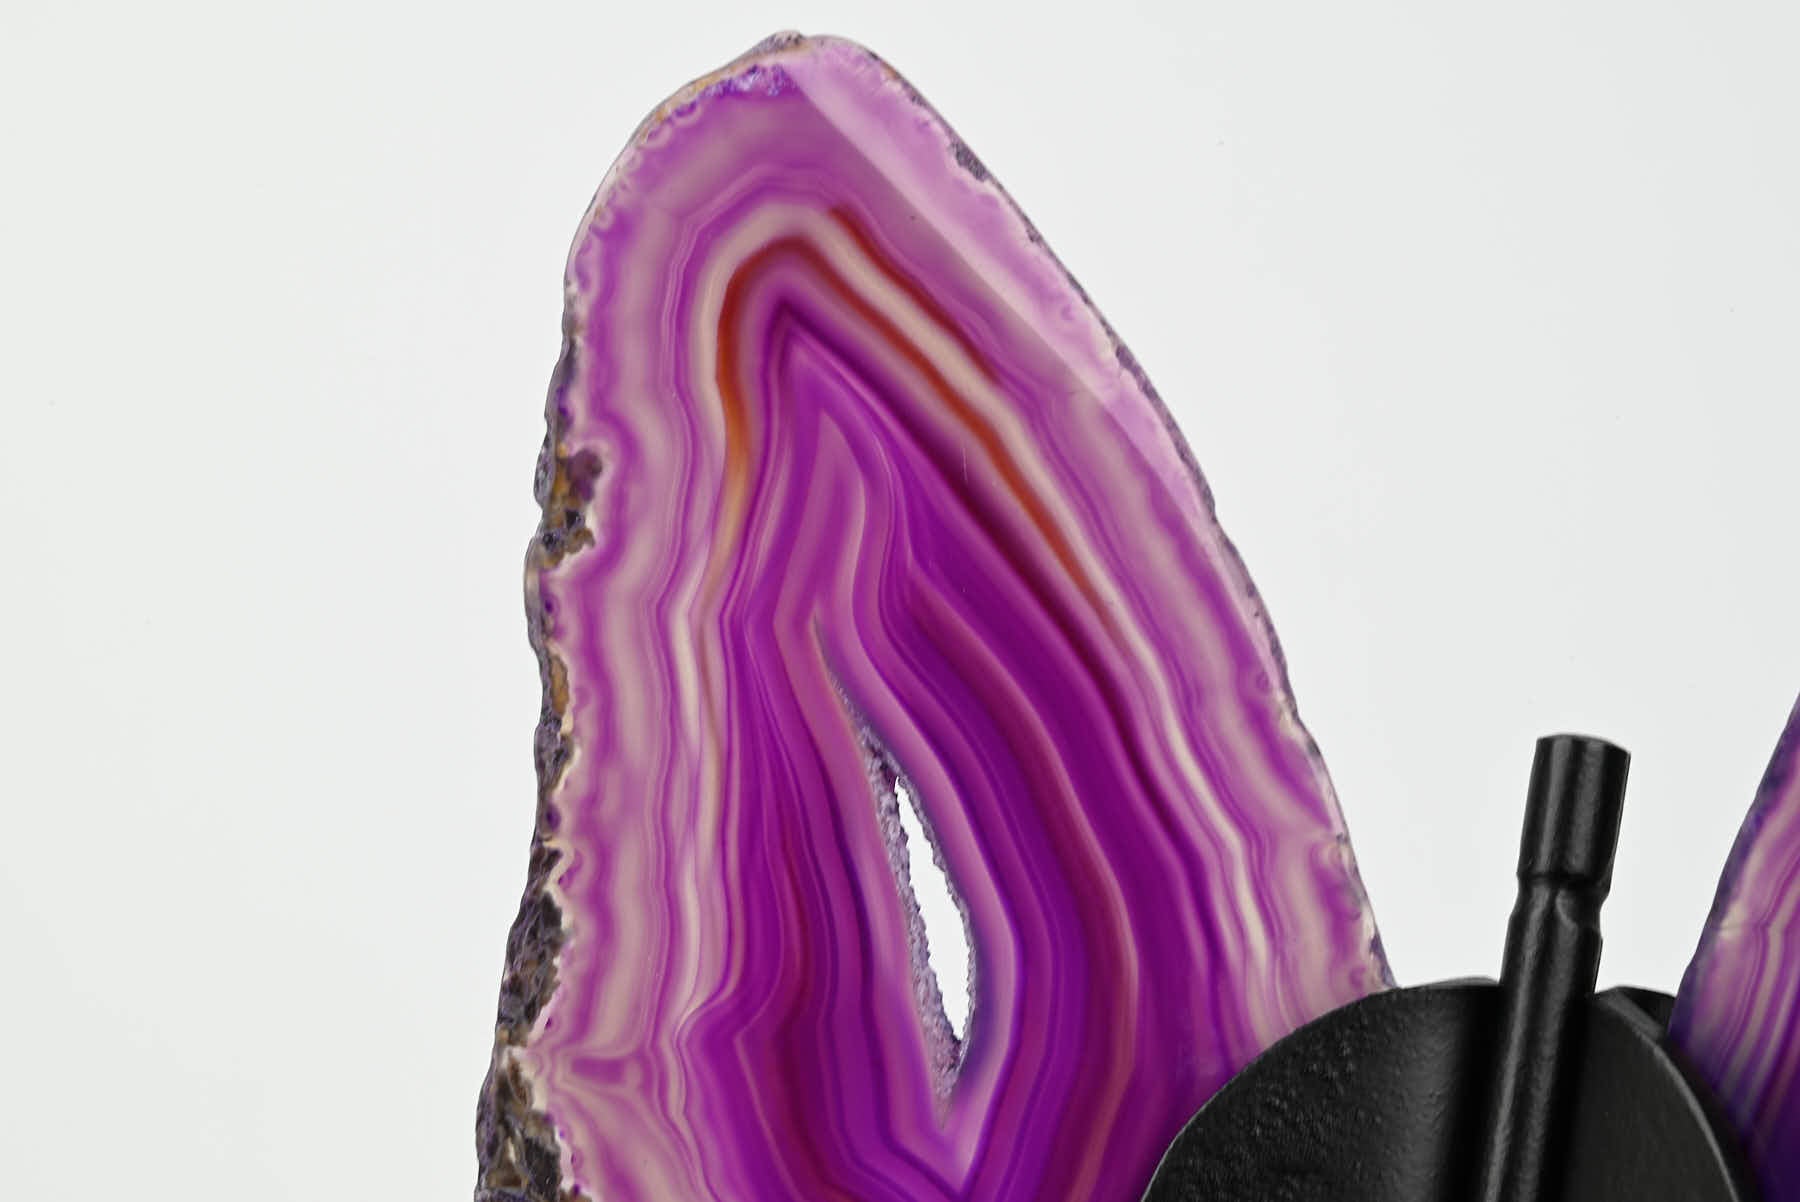 Purple Agate Butterfly on Stand - 0.39kg and 20cm Tall - #BUPURP-10010